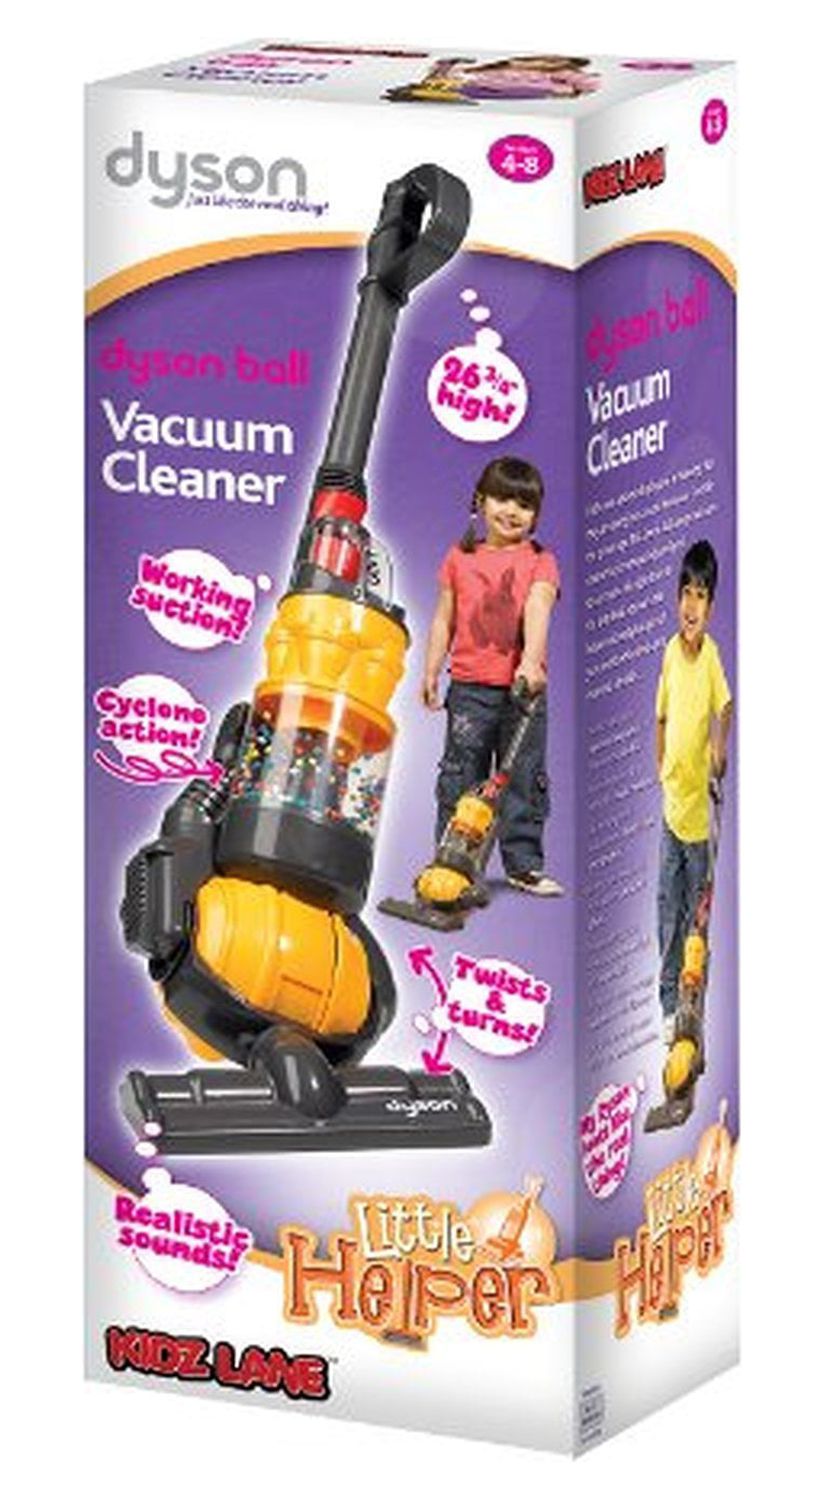 Toy Vacuum- Dyson Ball Vacuum With Real Suction and Sounds - image 5 of 6